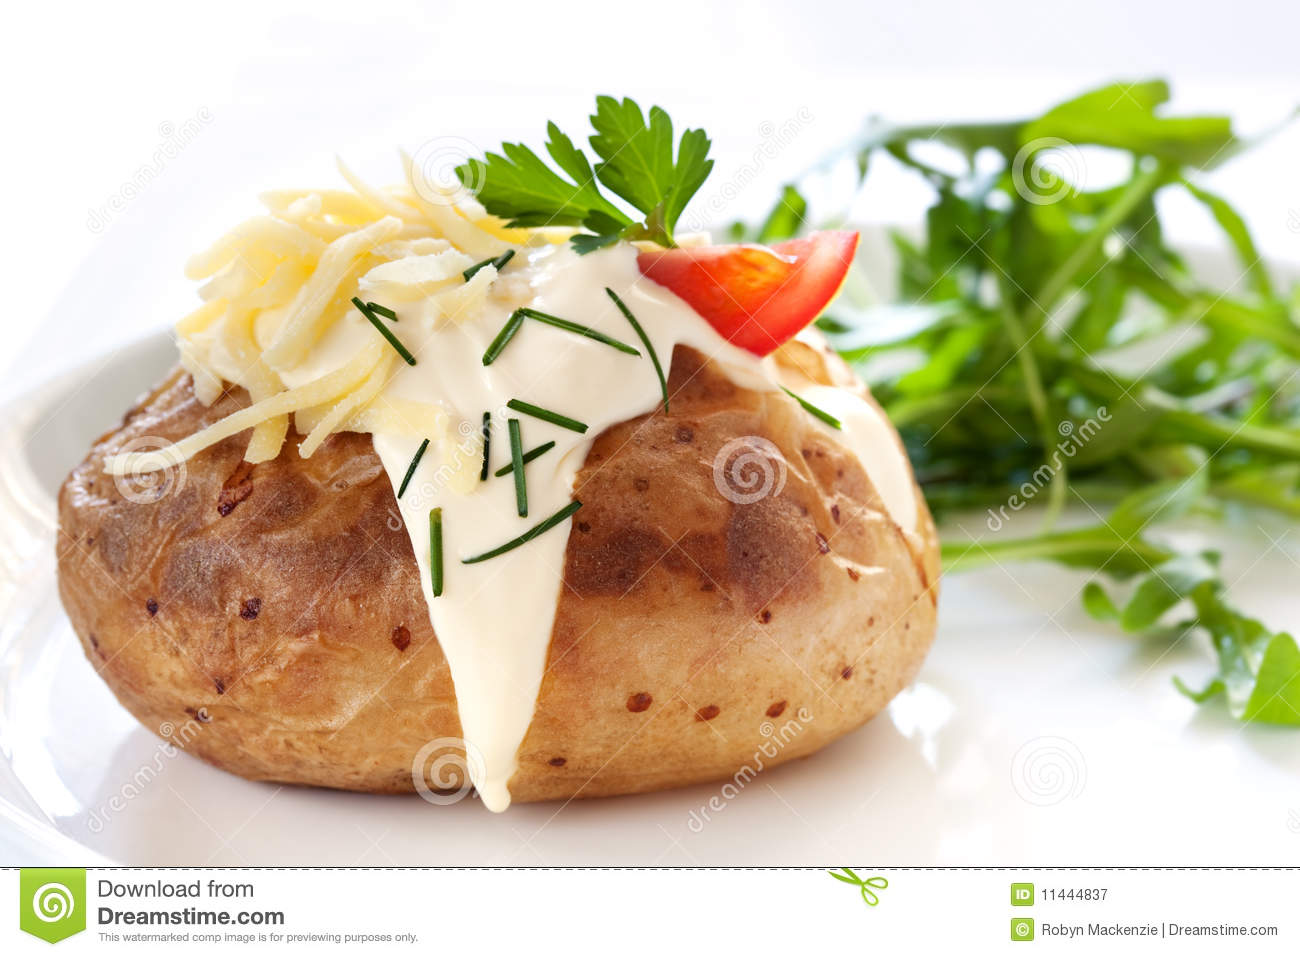 Baked Potato Filled With Sour Cream And Grated Cheese With Arugula On